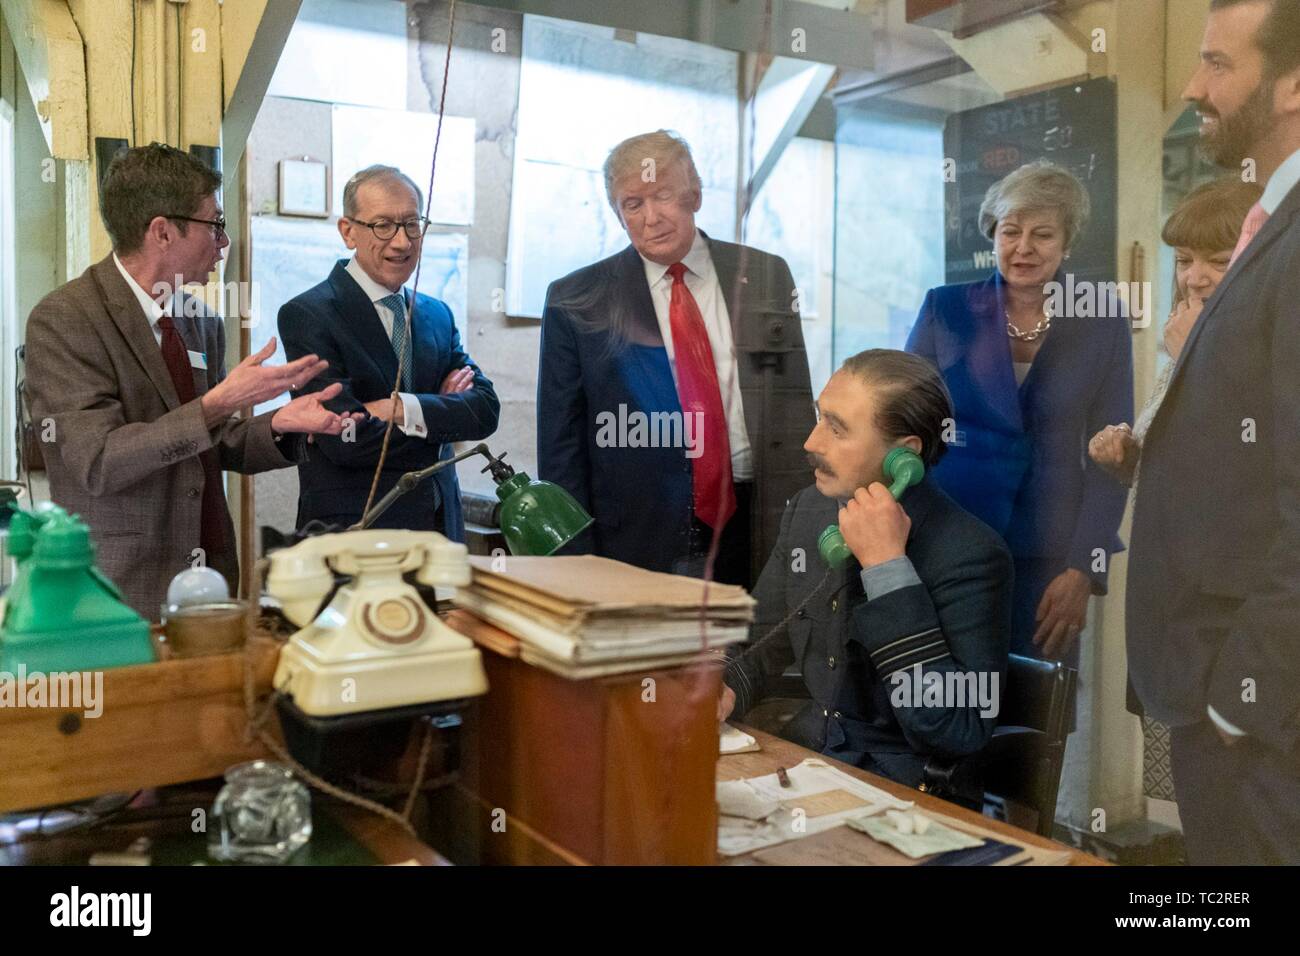 London, UK. 04th June, 2019. U.S President Donald Trump, outgoing British Prime Minister Theresa May and her husband Philip May tour the Churchill War Rooms June 4, 2019 in London, England. Credit: Planetpix/Alamy Live News Stock Photo